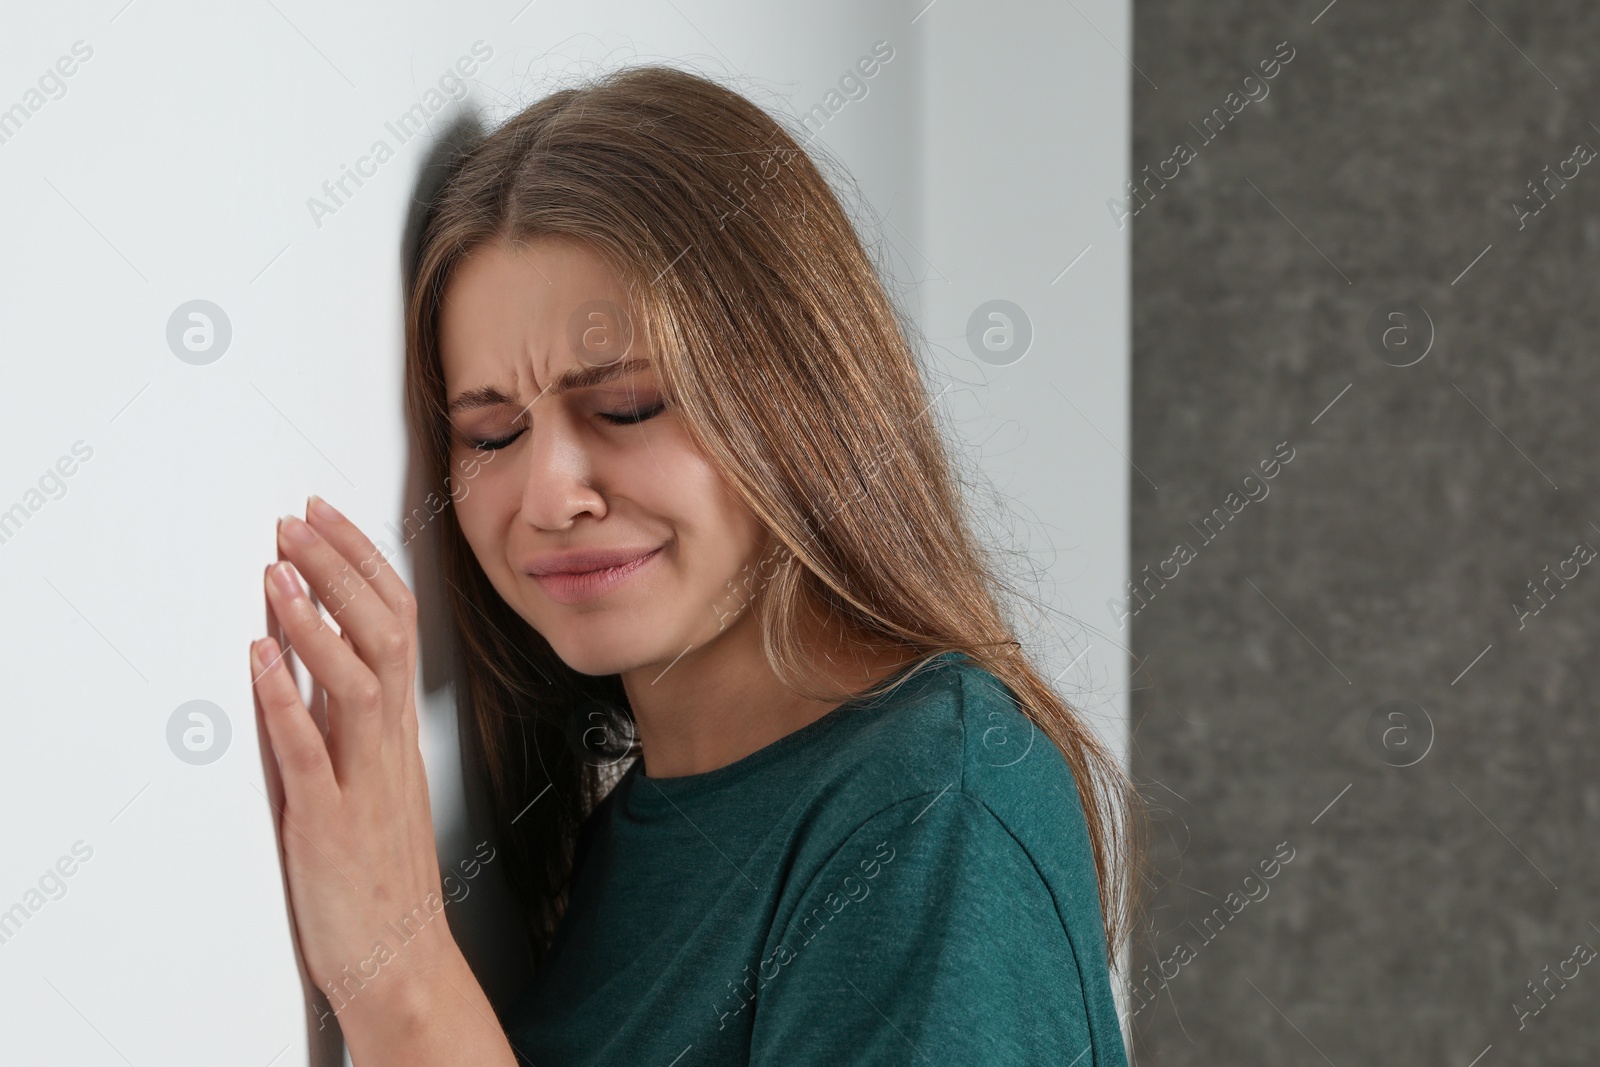 Photo of Portrait of crying young woman near light wall. Stop violence